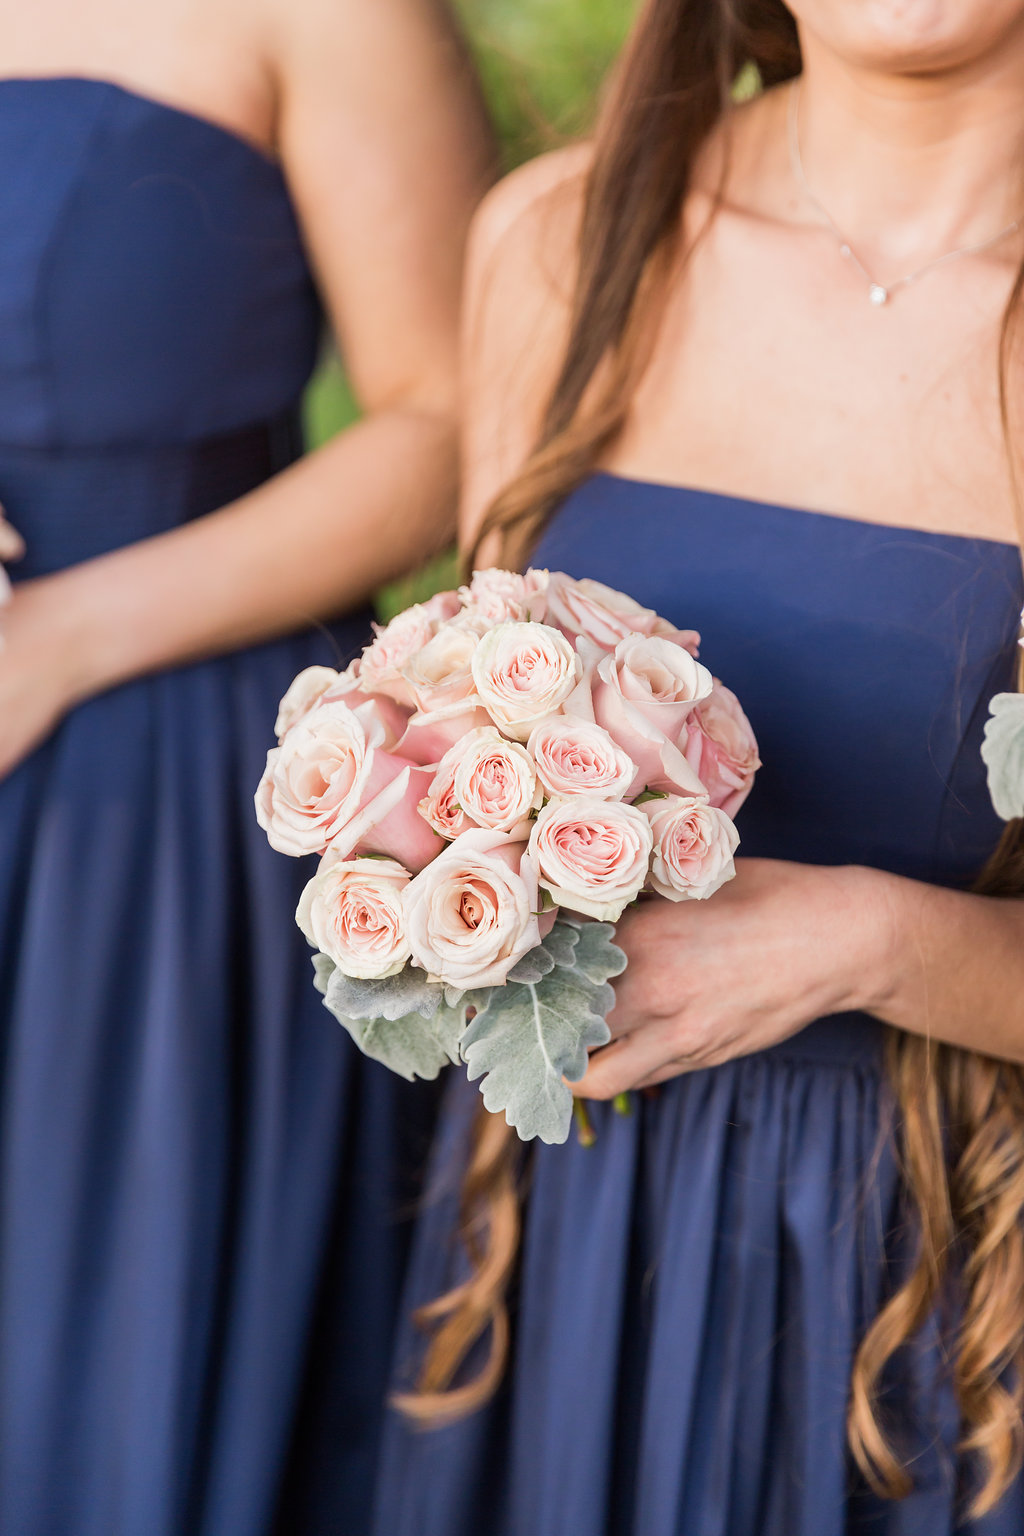 The bridesmaids wore navy blue and carried rose and dusty miller bouquets